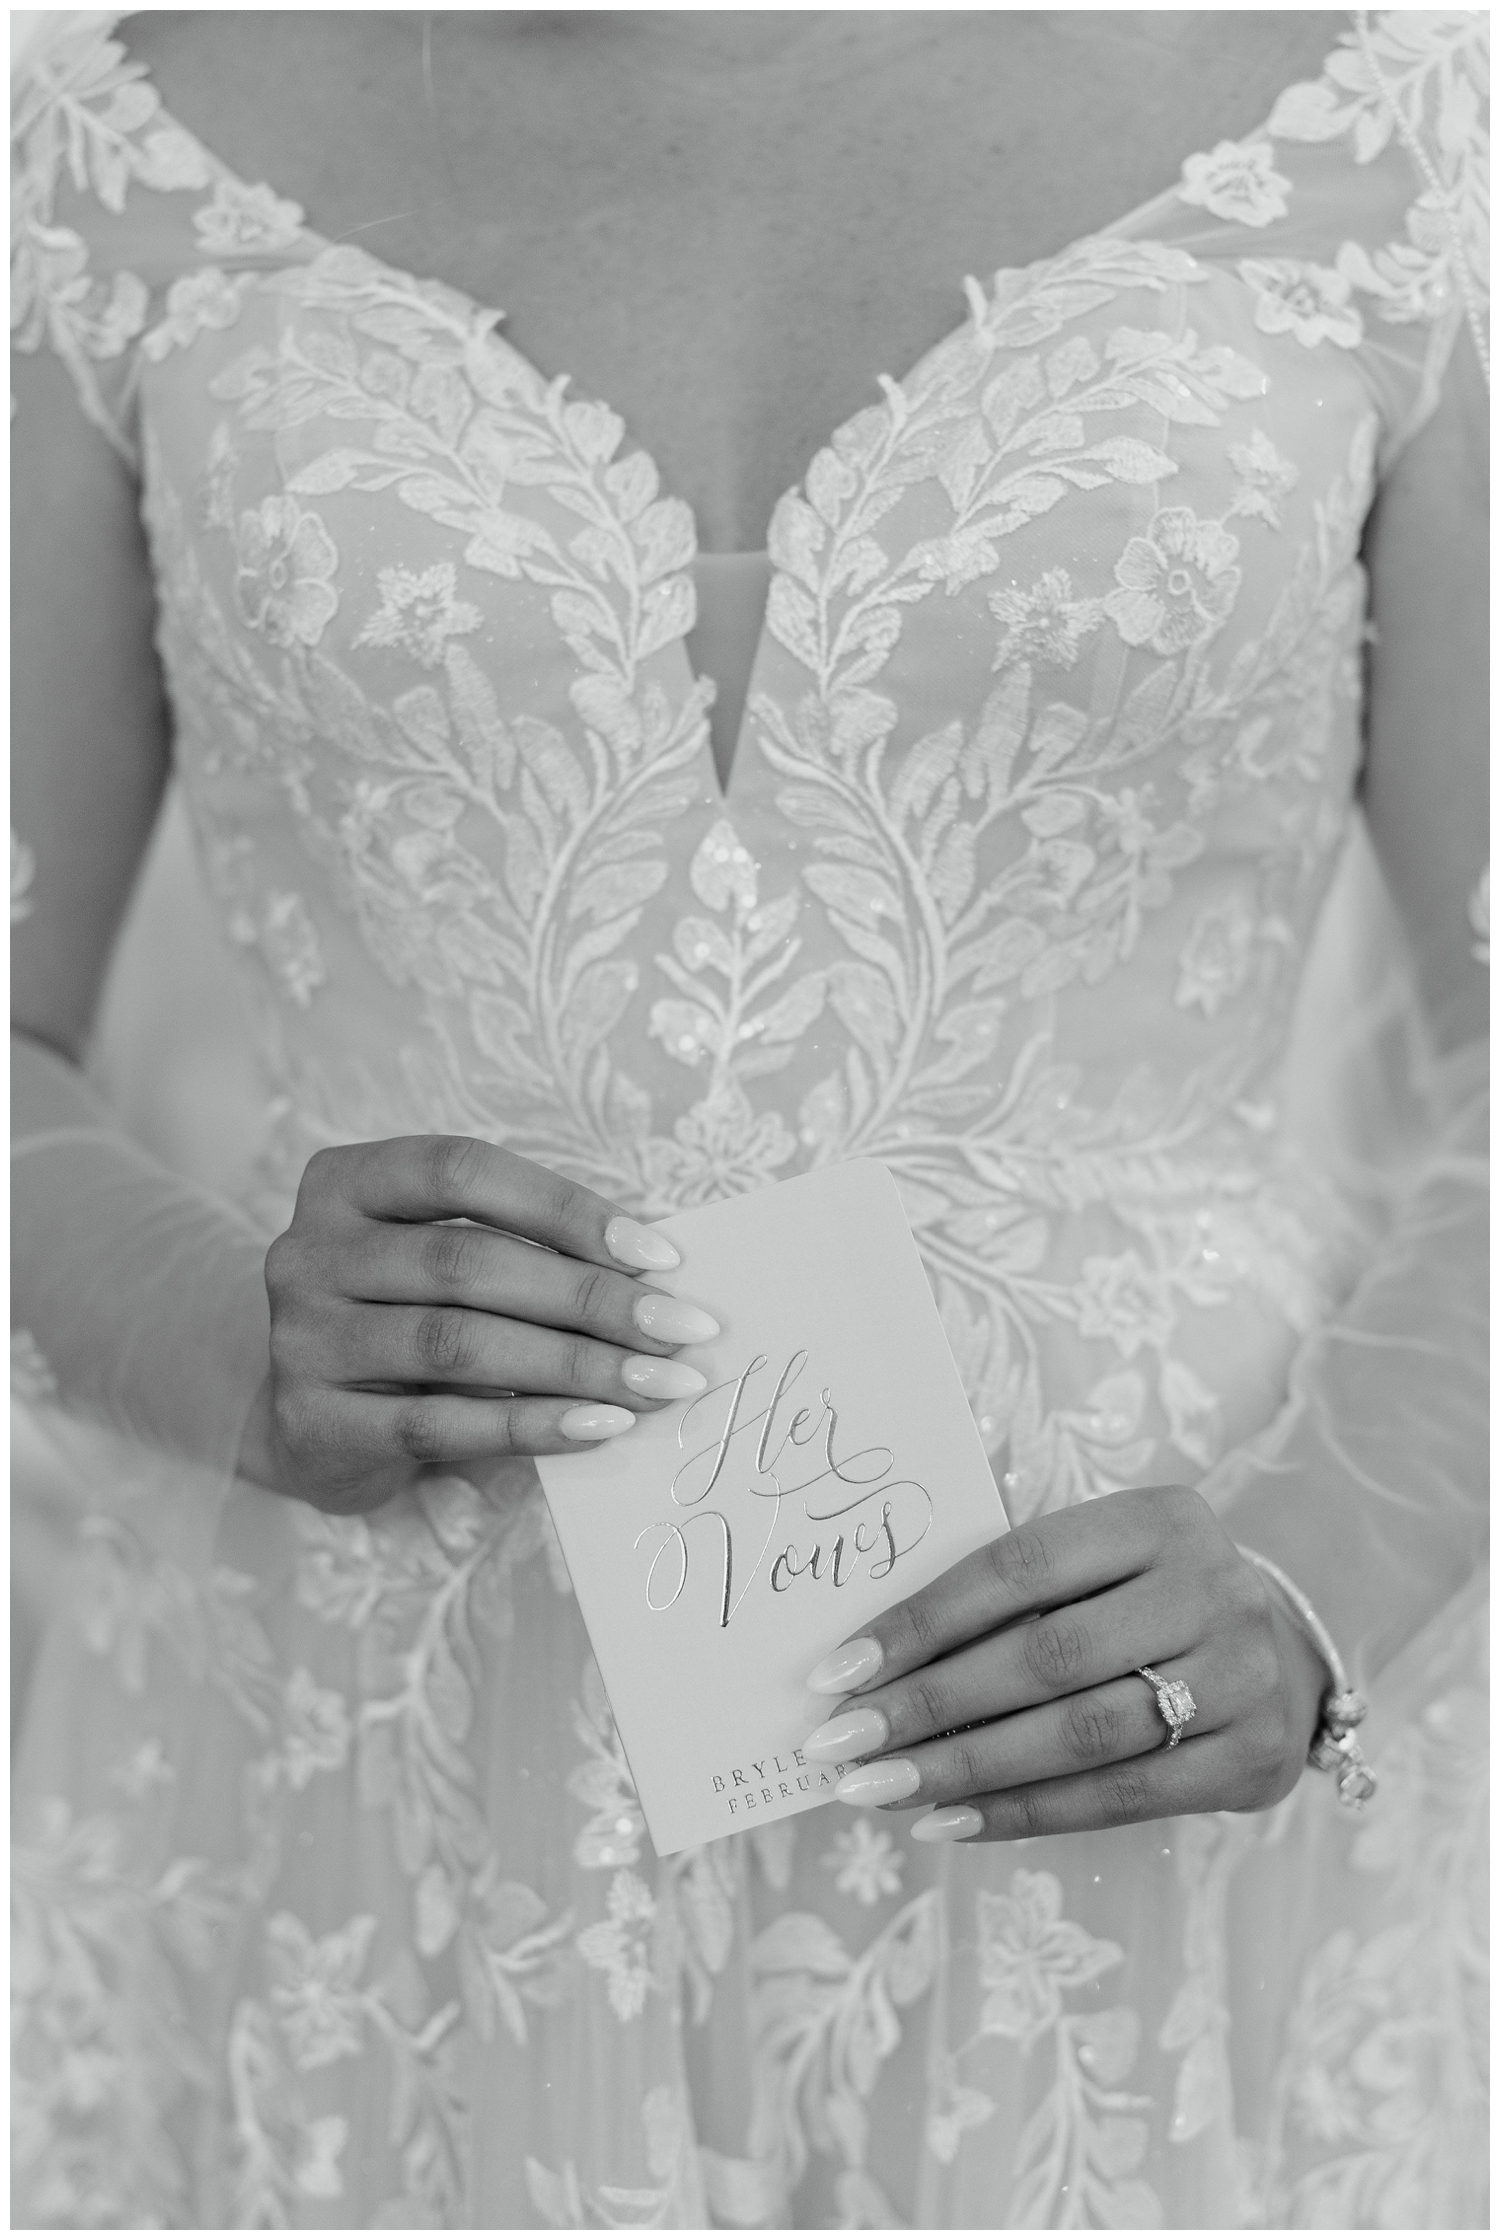 black and white image of bride's hands holding vow book